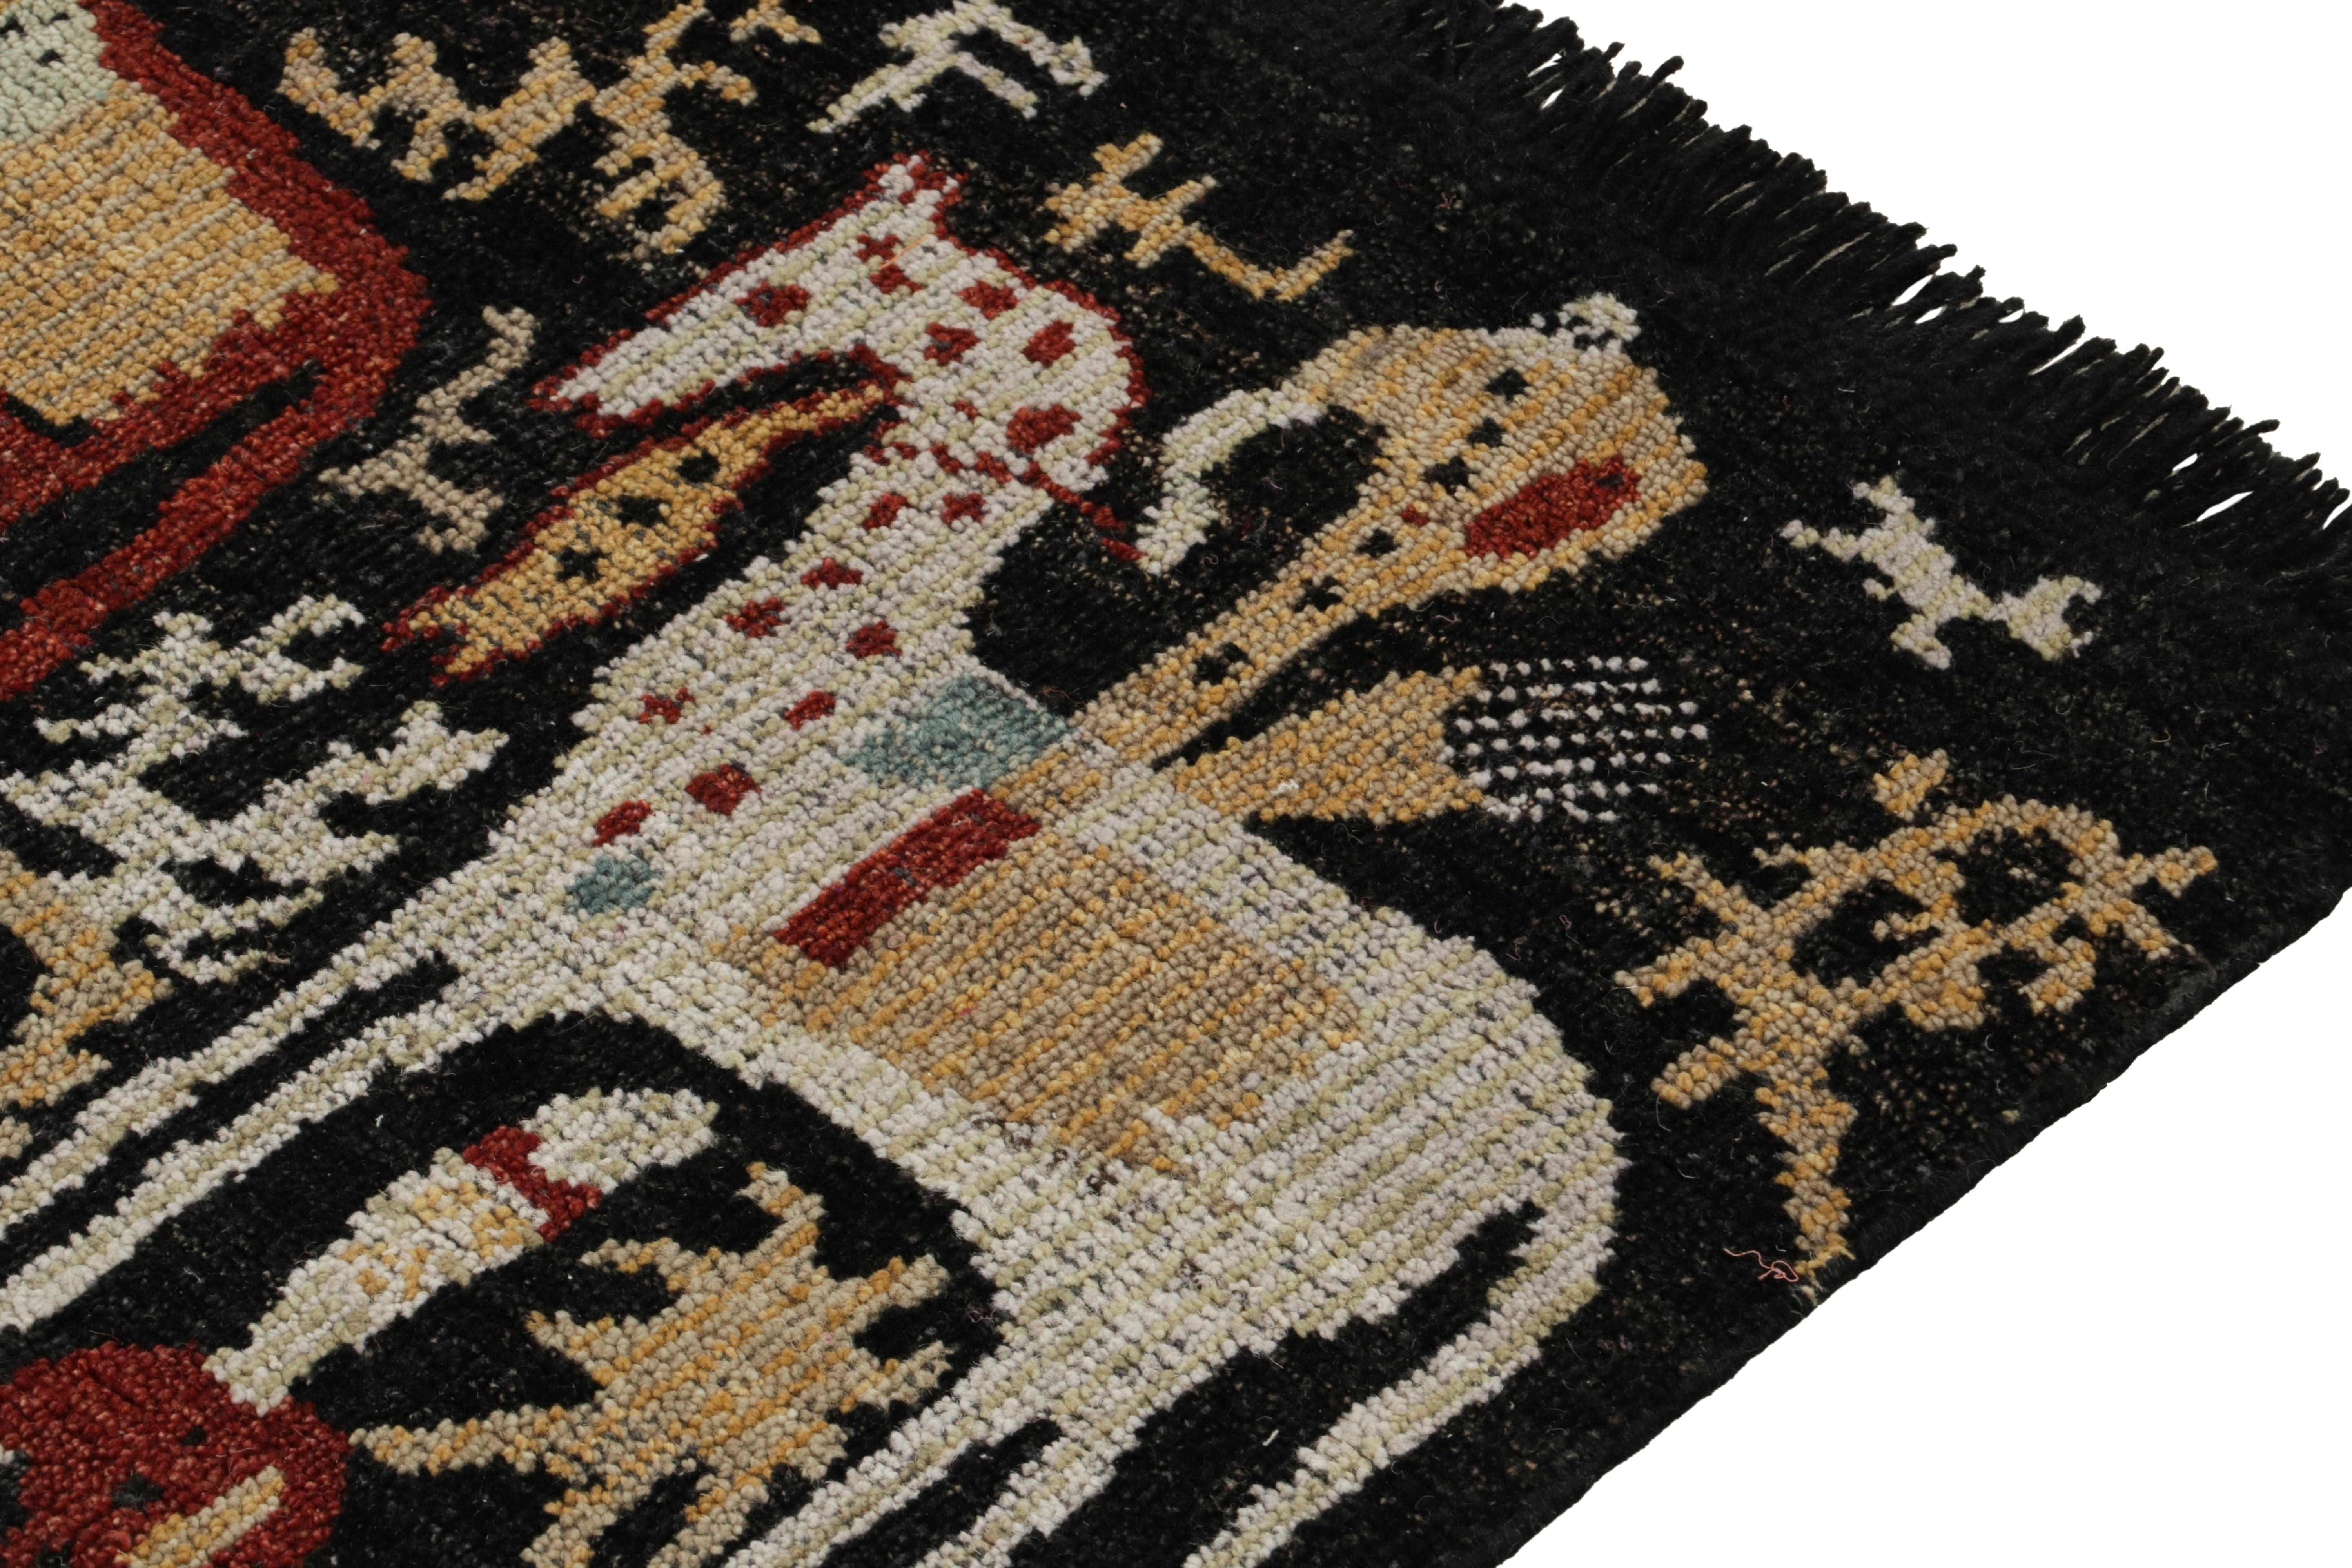 Hand-Knotted Rug & Kilim's Tribal Style Rug in Black, Red and White Pictorial Pattern For Sale